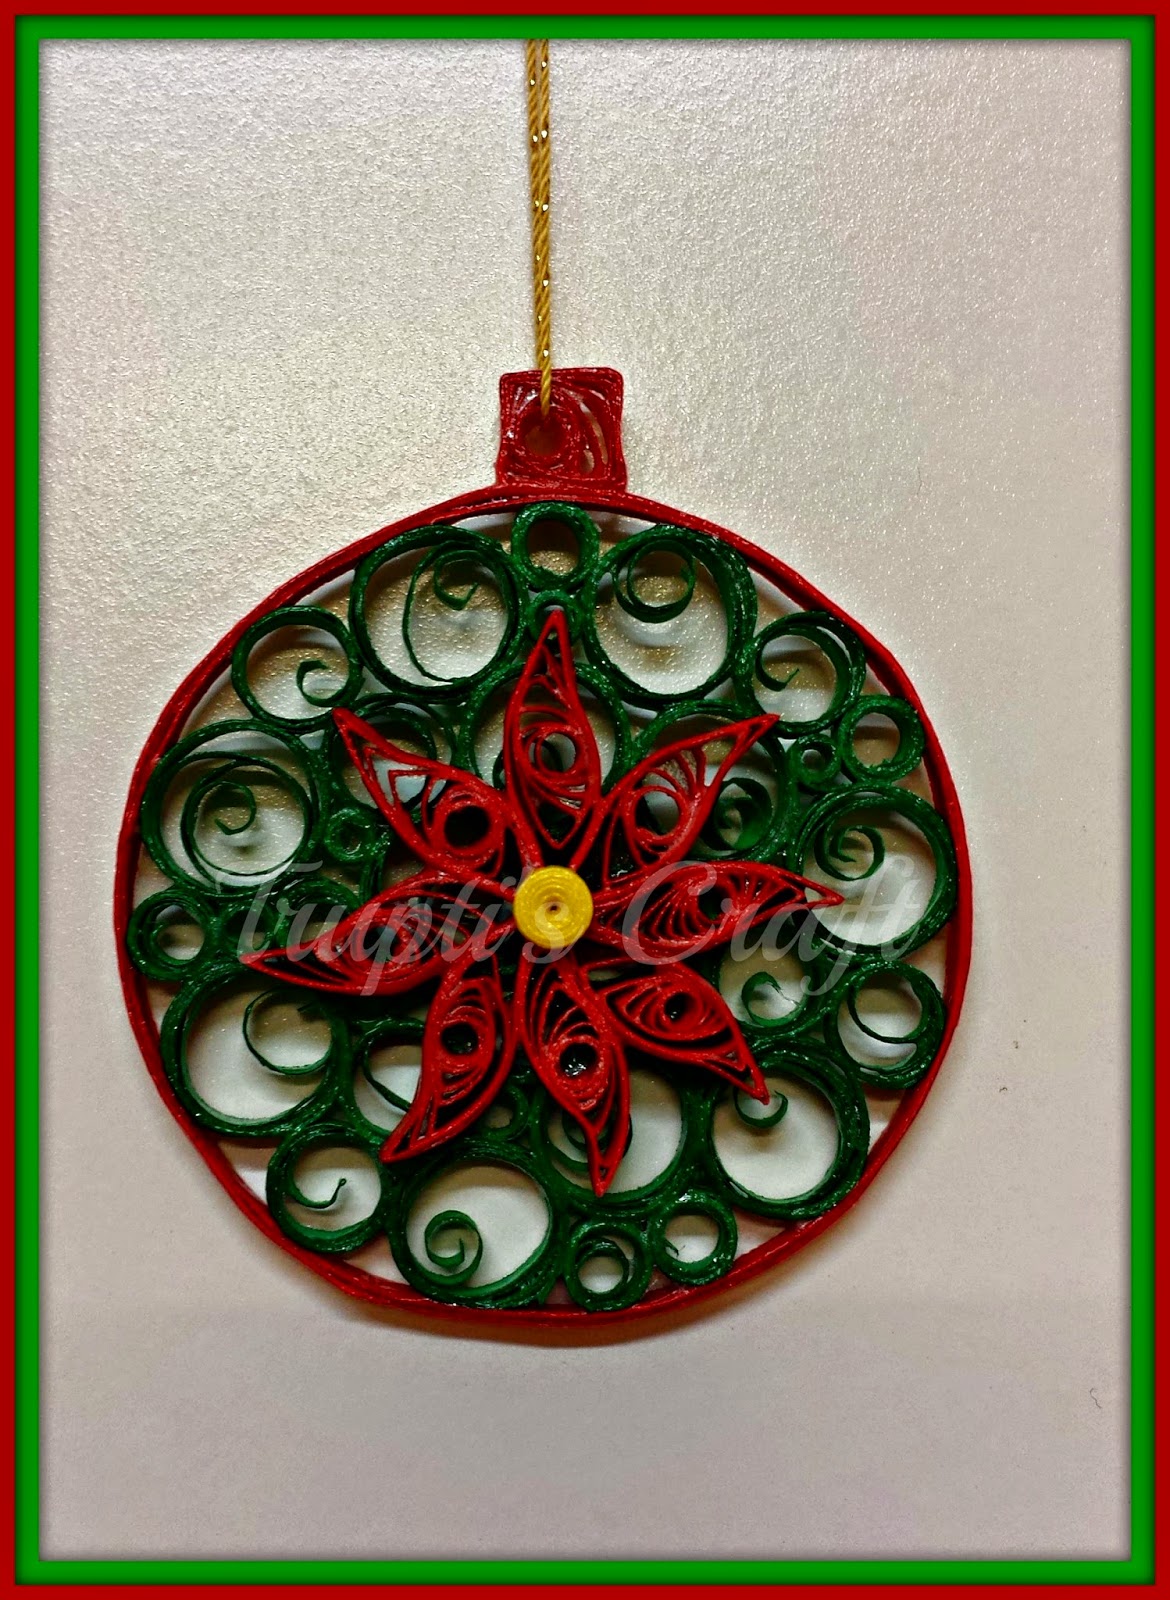 Trupti's Craft Paper Quilling Christmas Ornament